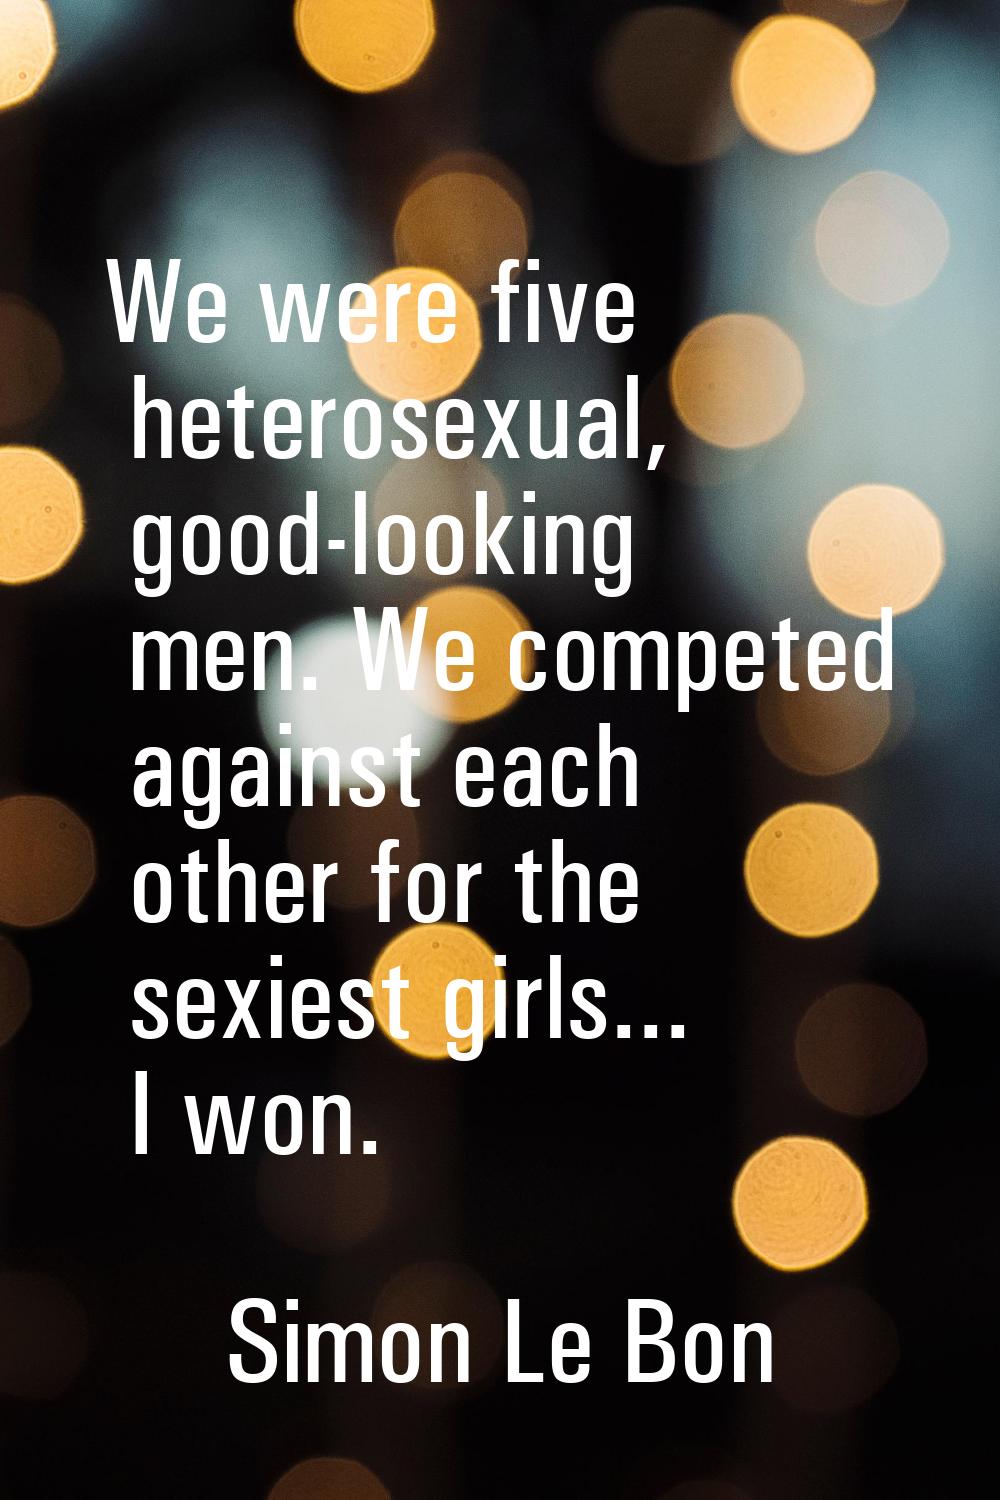 We were five heterosexual, good-looking men. We competed against each other for the sexiest girls..